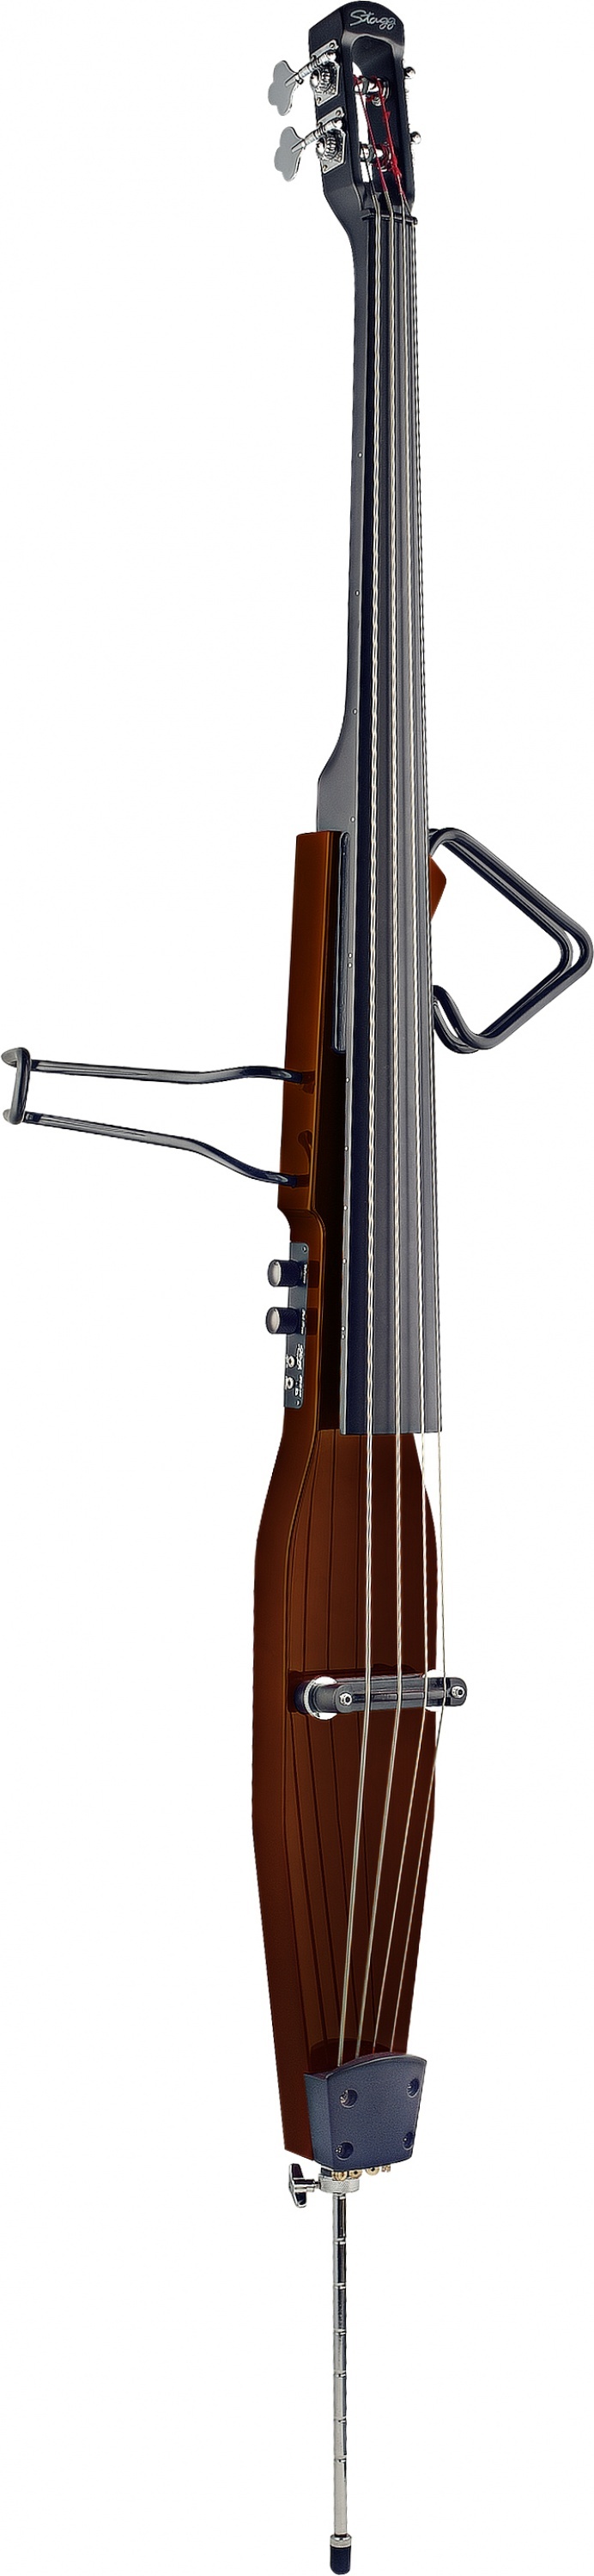 Stagg Edb-3/4 Dbr - Electric double bass - Main picture